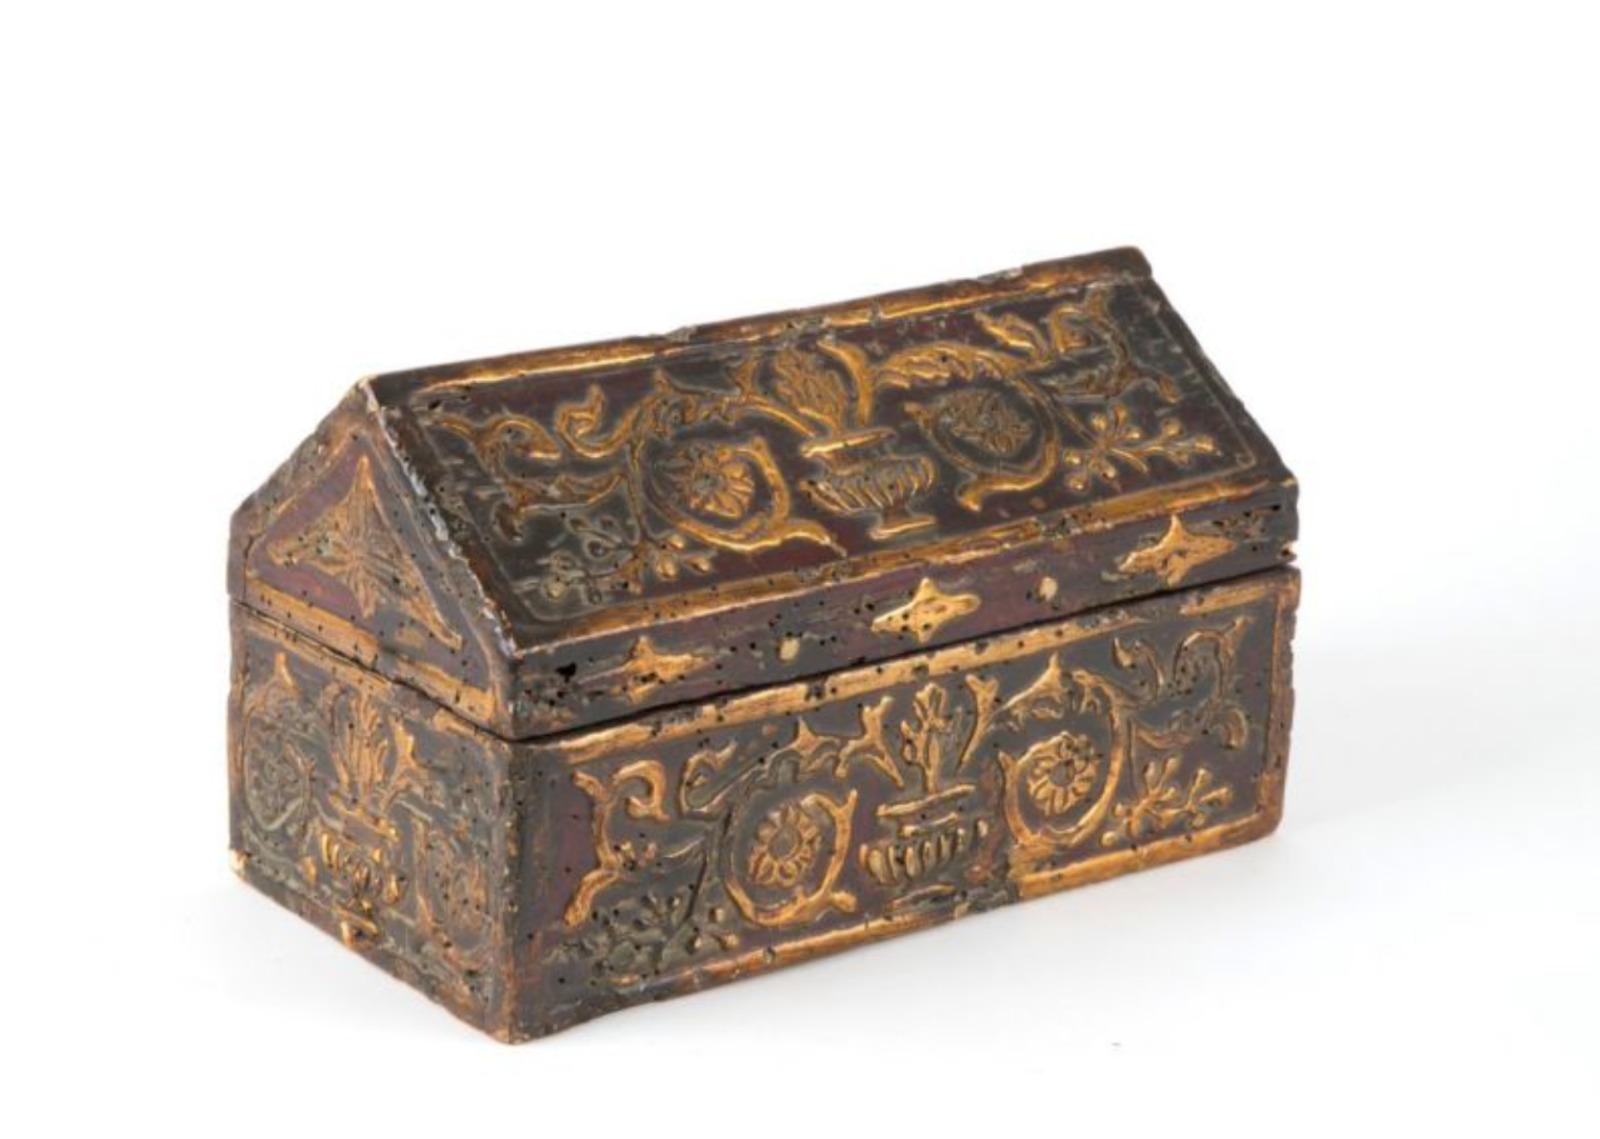 Northern Italy box set with 16th century Floral Motifs
18.5x30x16cm
Casket in carved and gilded wood with floral motifs.
Sealing wax stamp inside.
Vintage defects.